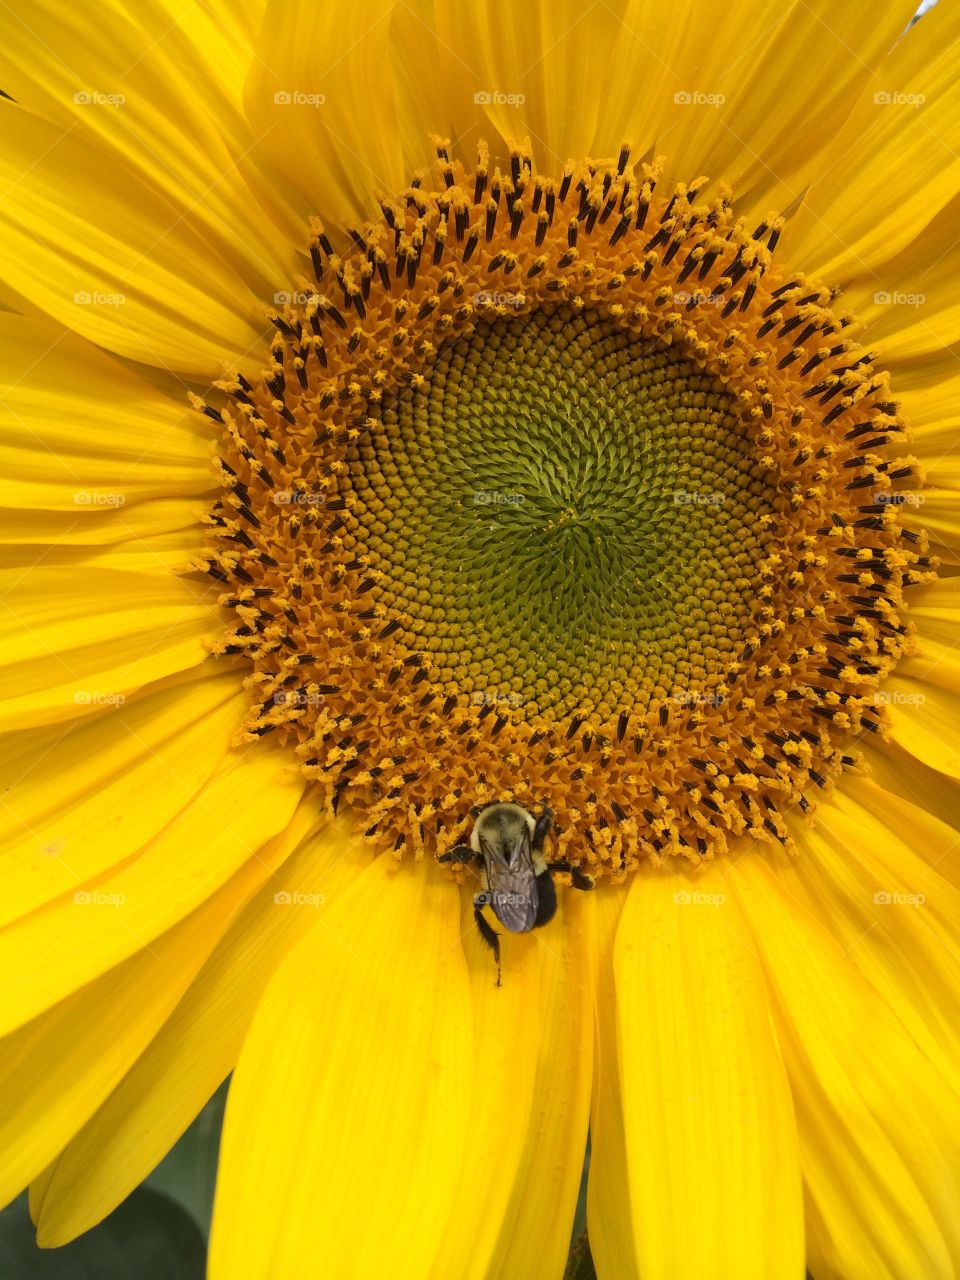 Buzzed. One bumble bee on sunflower 2014